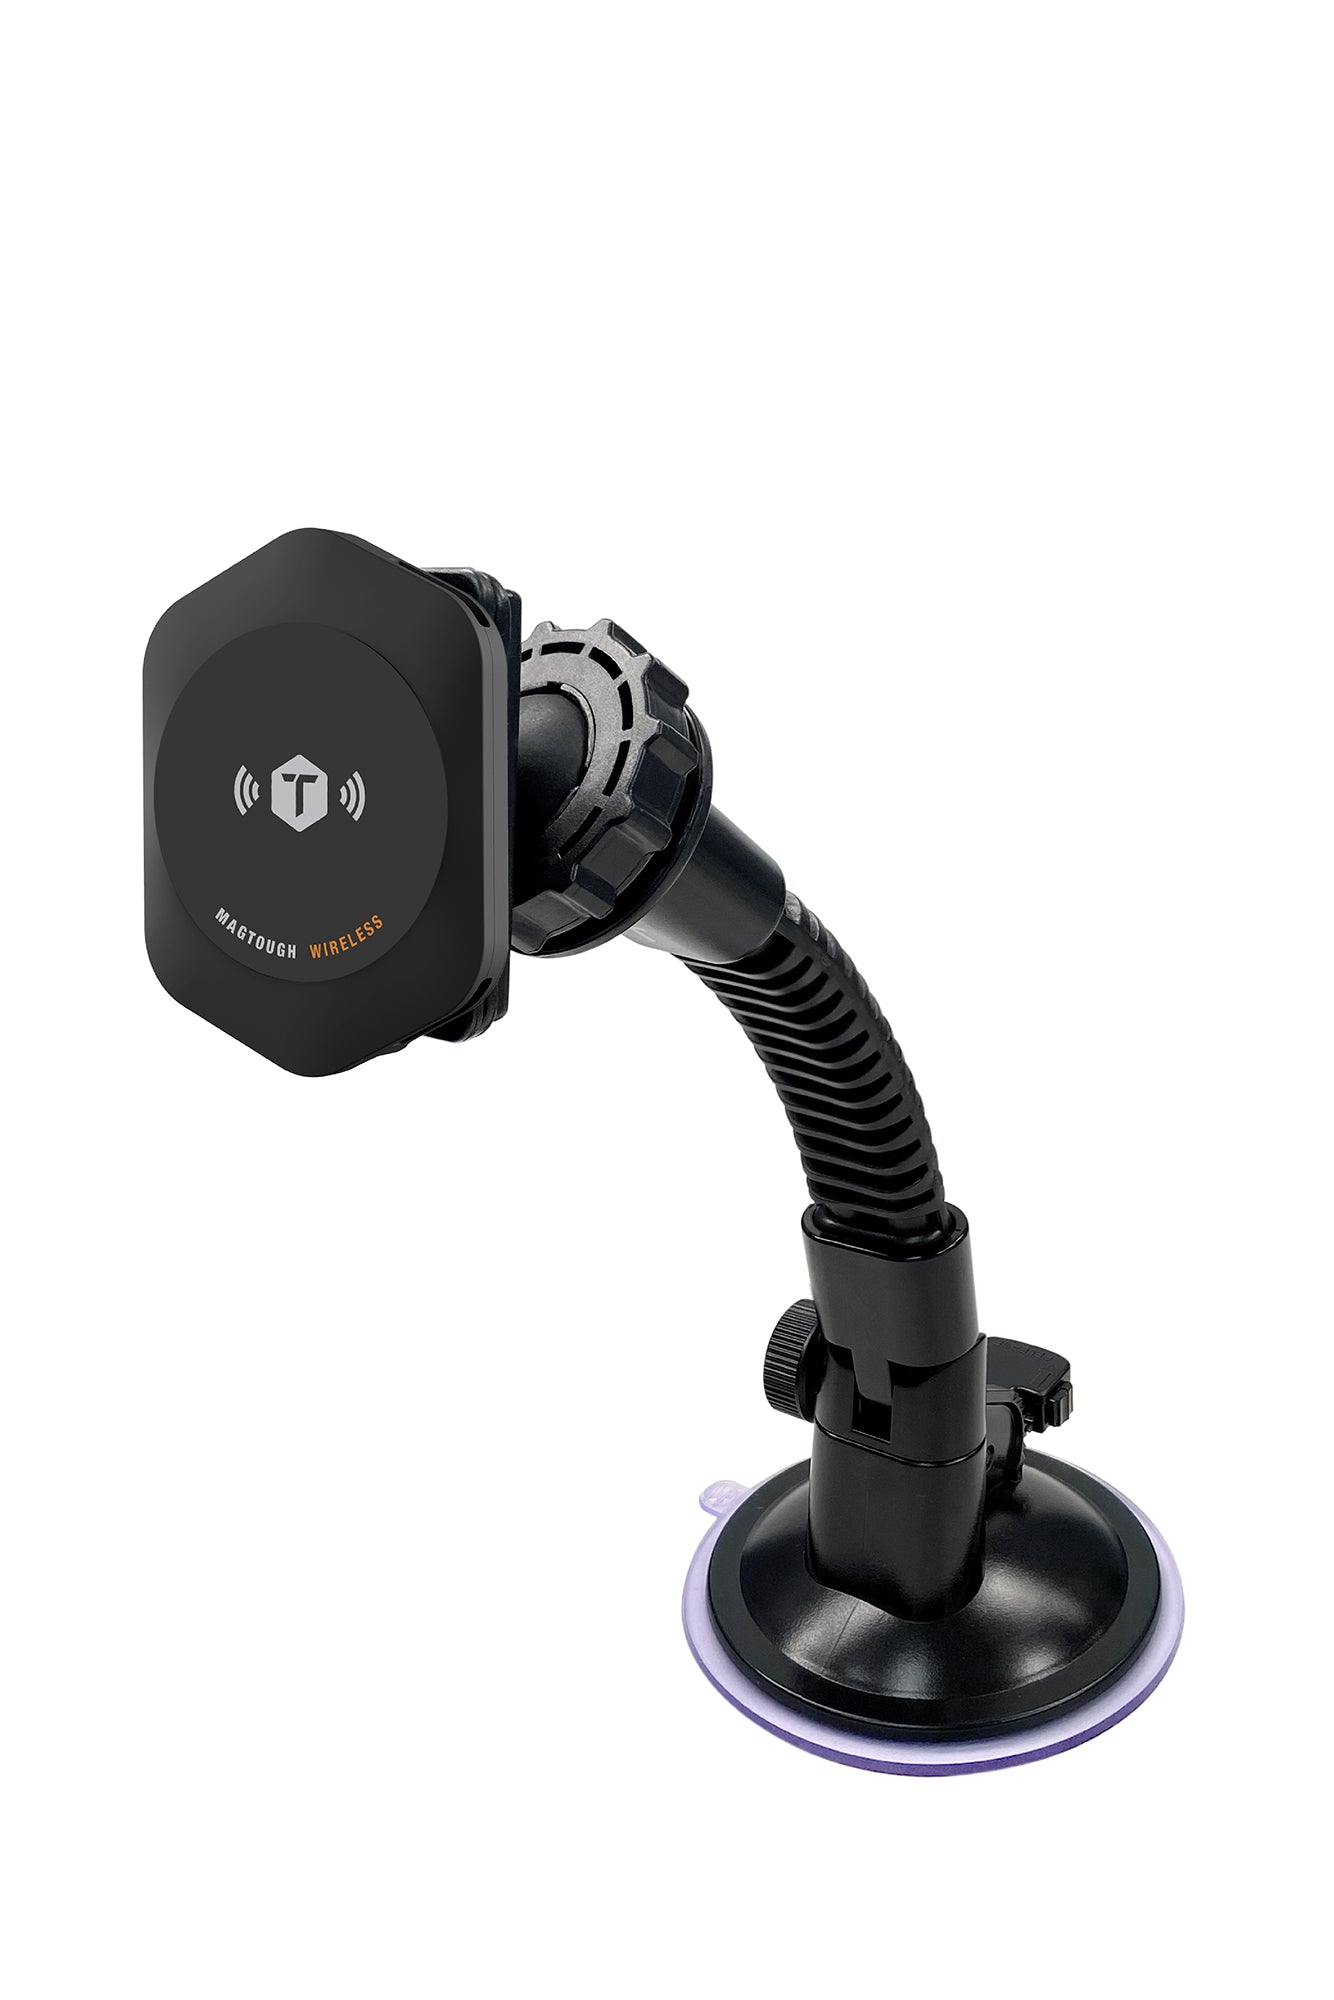 MagTough Magnetic Wireless Charging Dash & Windshield Mount